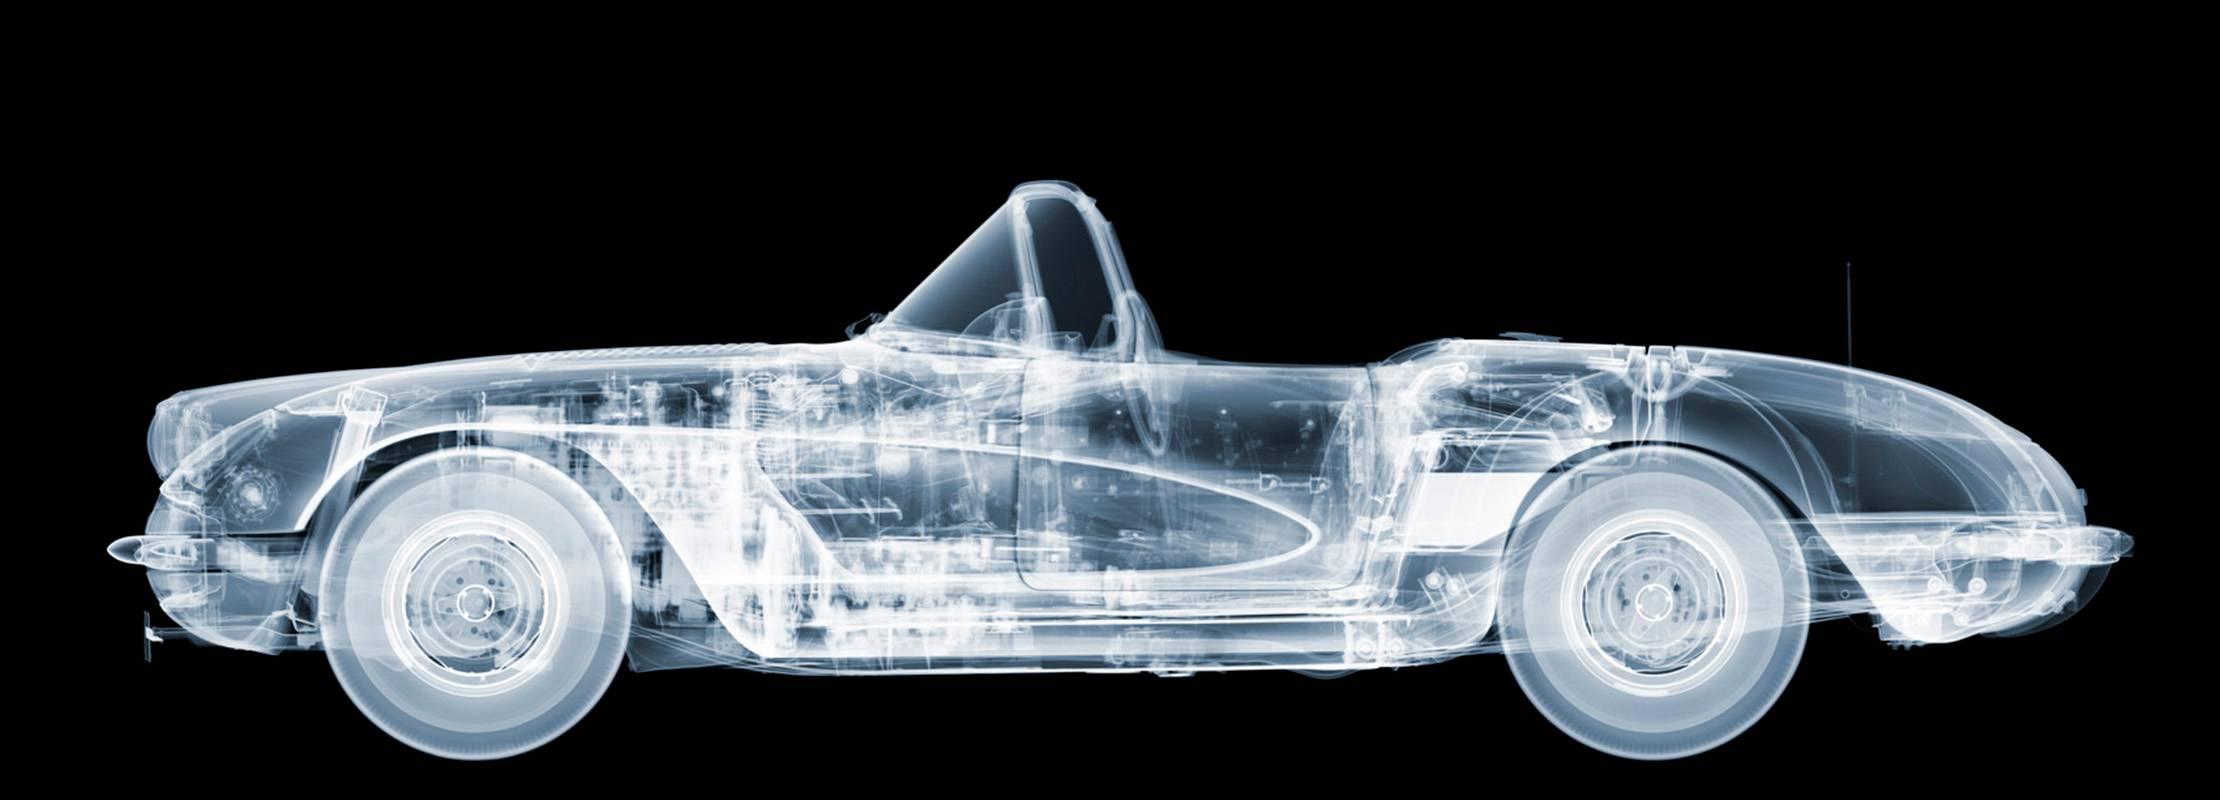 Nick Veasey Abstract Photograph – 1958 Corvette C1